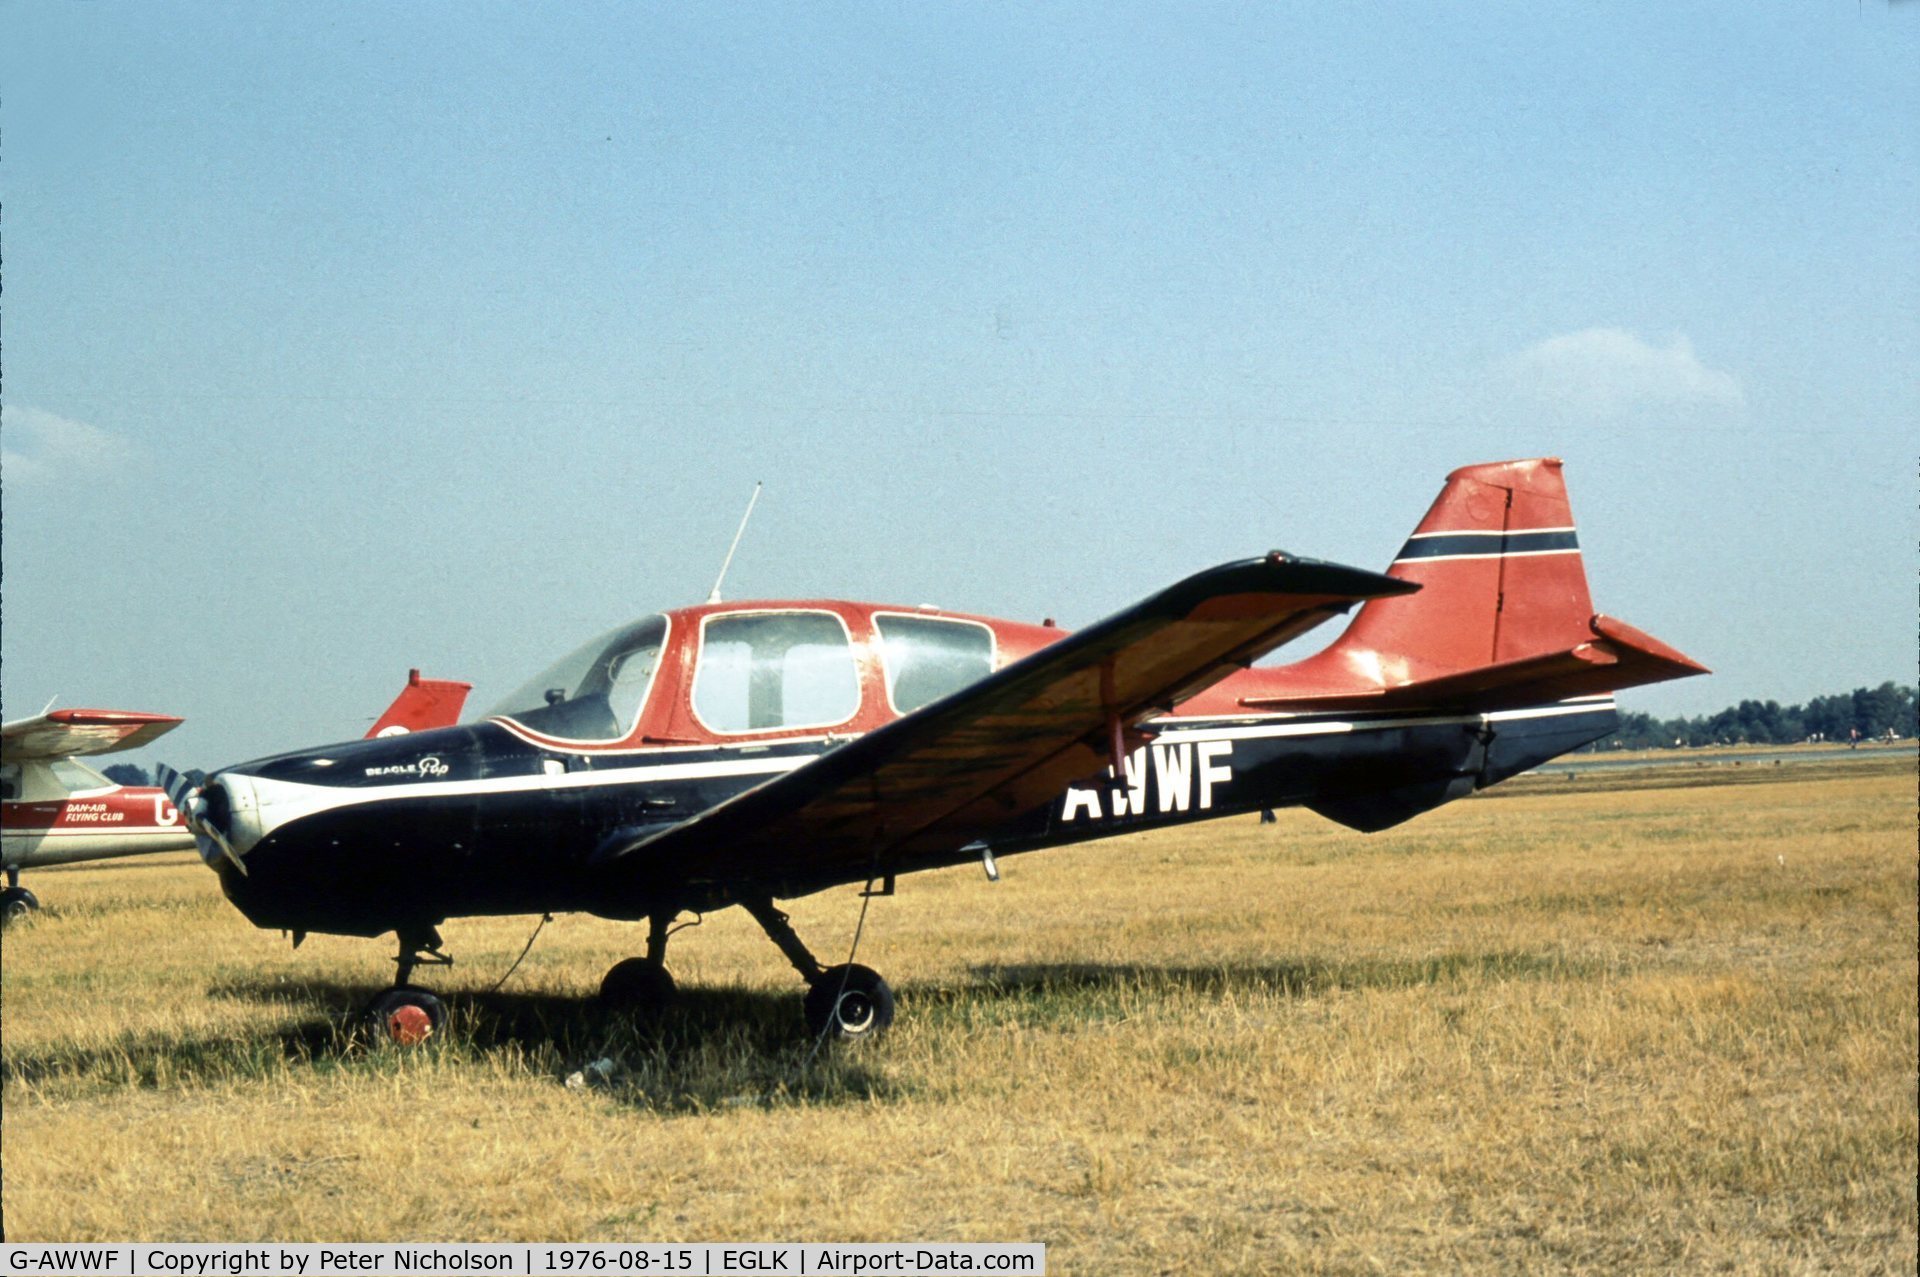 G-AWWF, 1969 Beagle B-121 Pup Series 1 (Pup 100) C/N B121-033, This Pup attended the 1976 Blackbushe Fly-in.